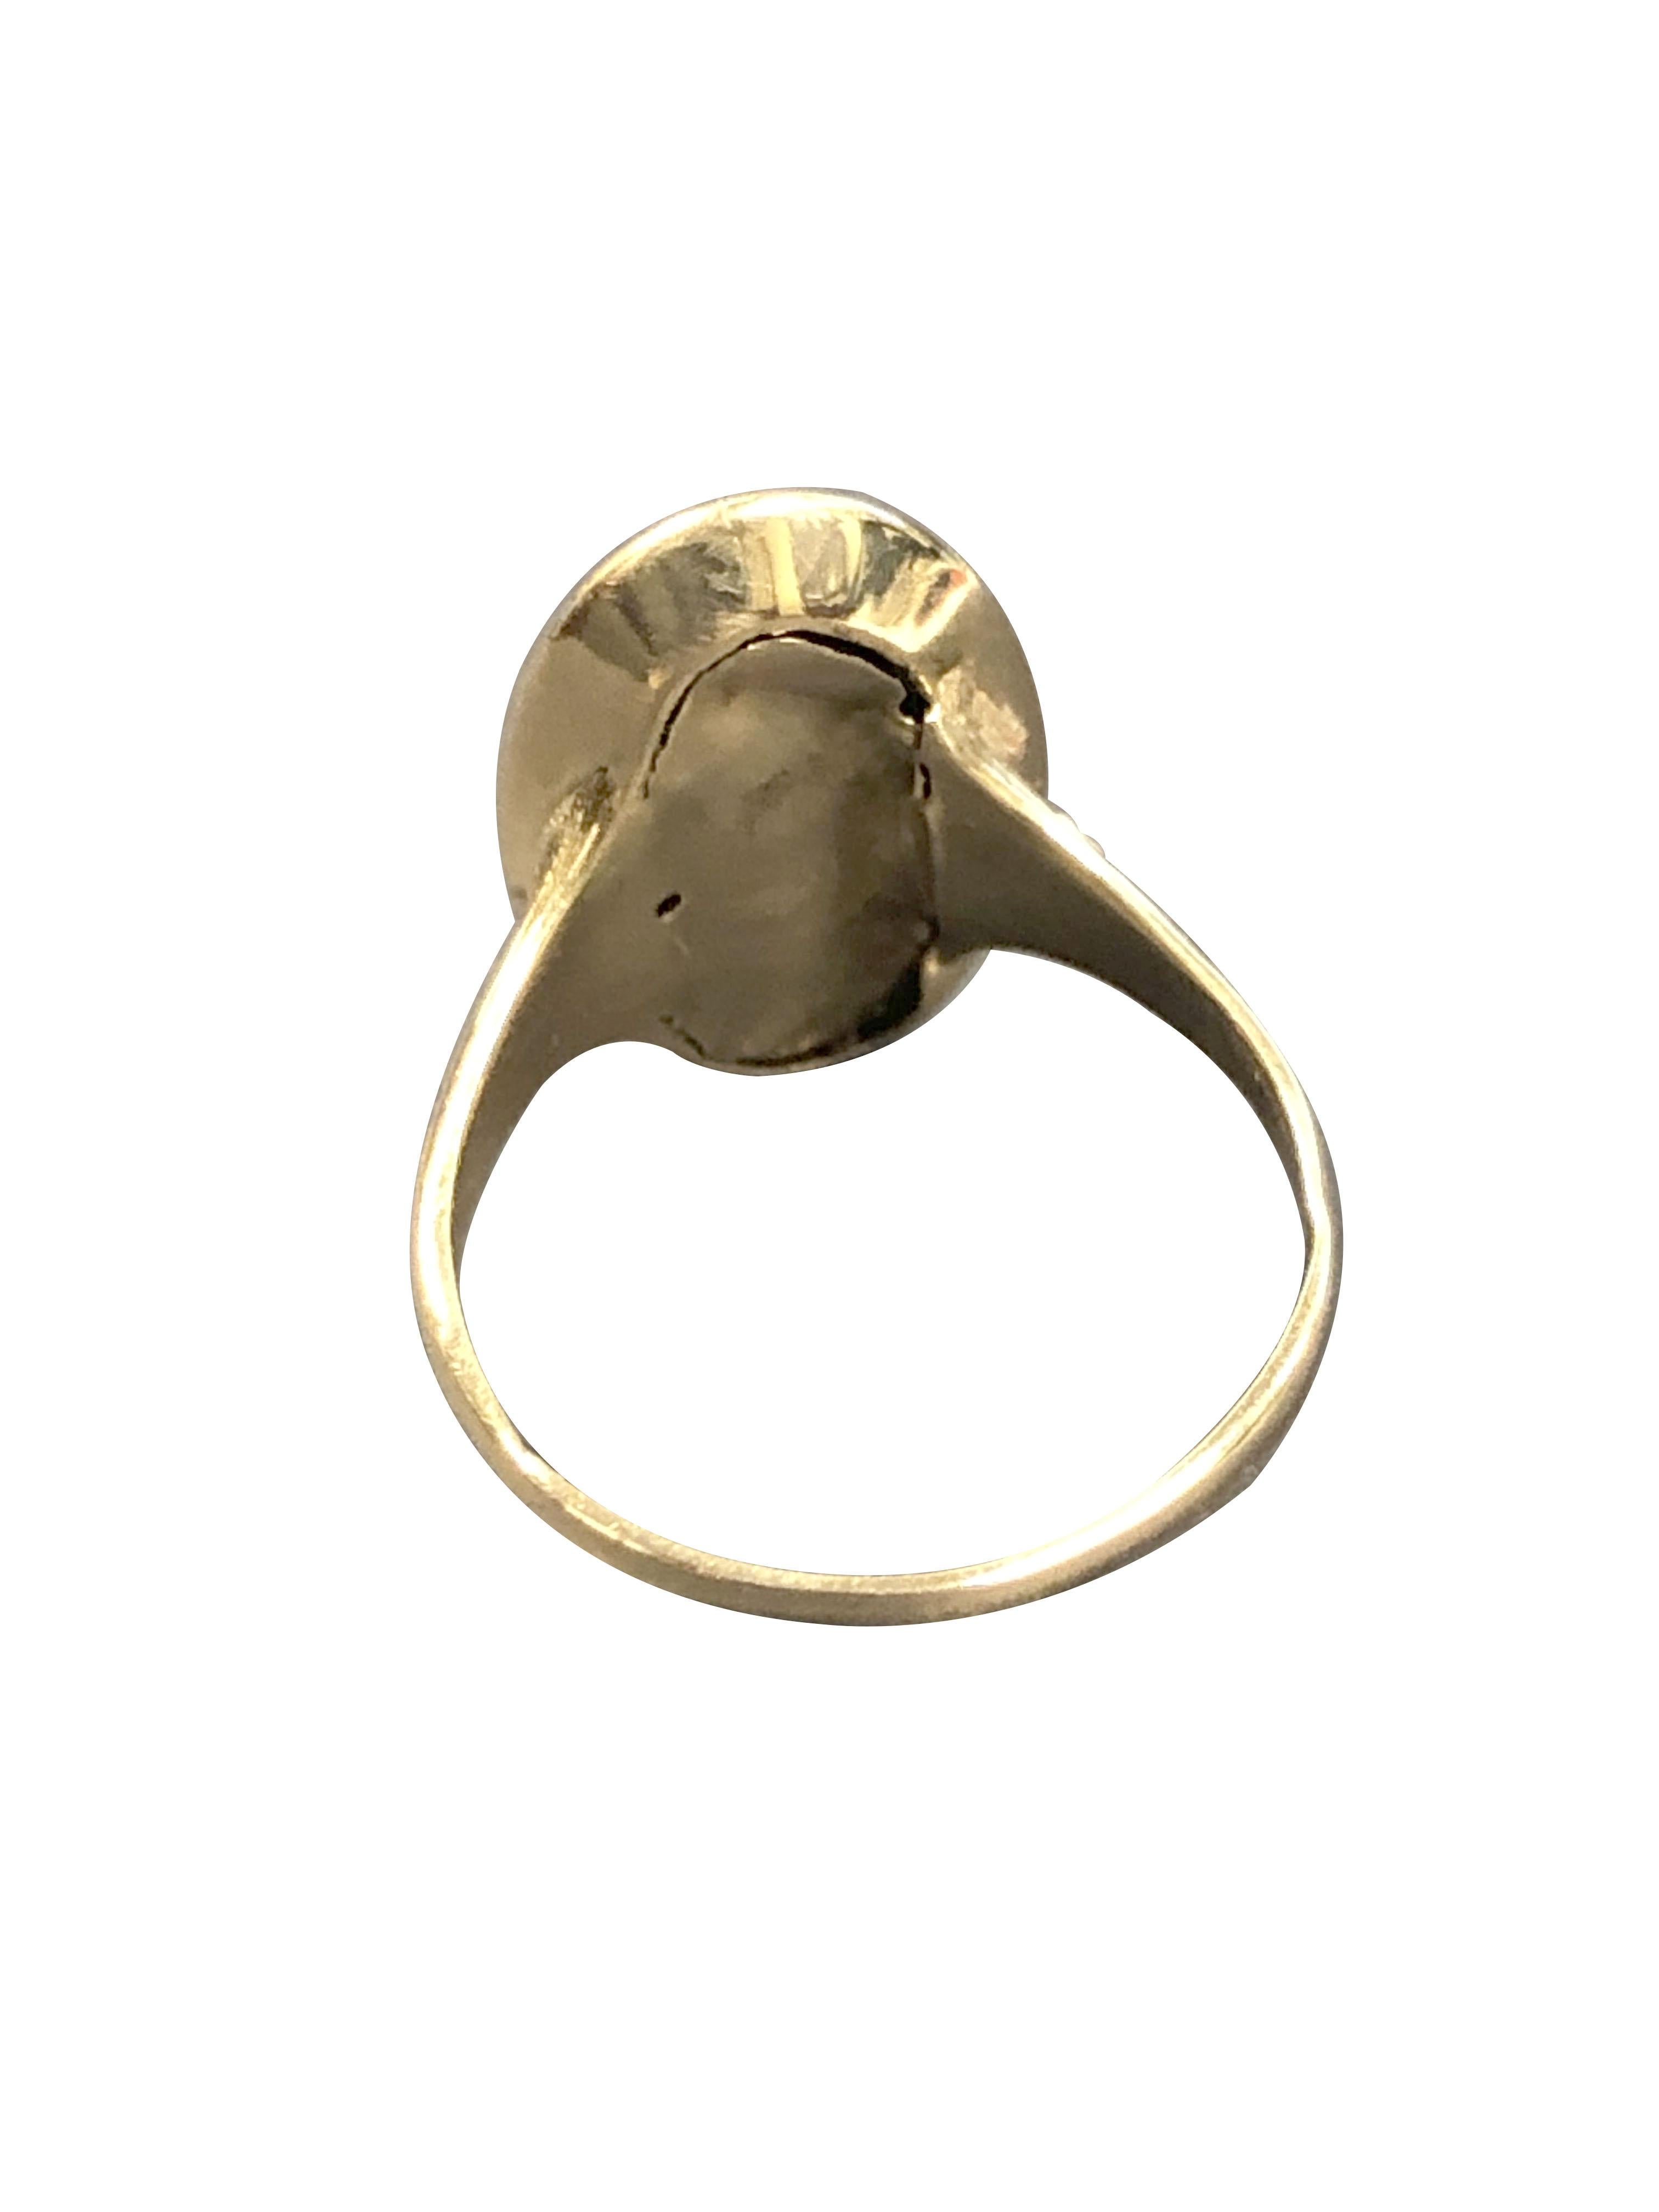 Women's Early Victorian Gold Diamond and Enamel Mourning Memorial Ring